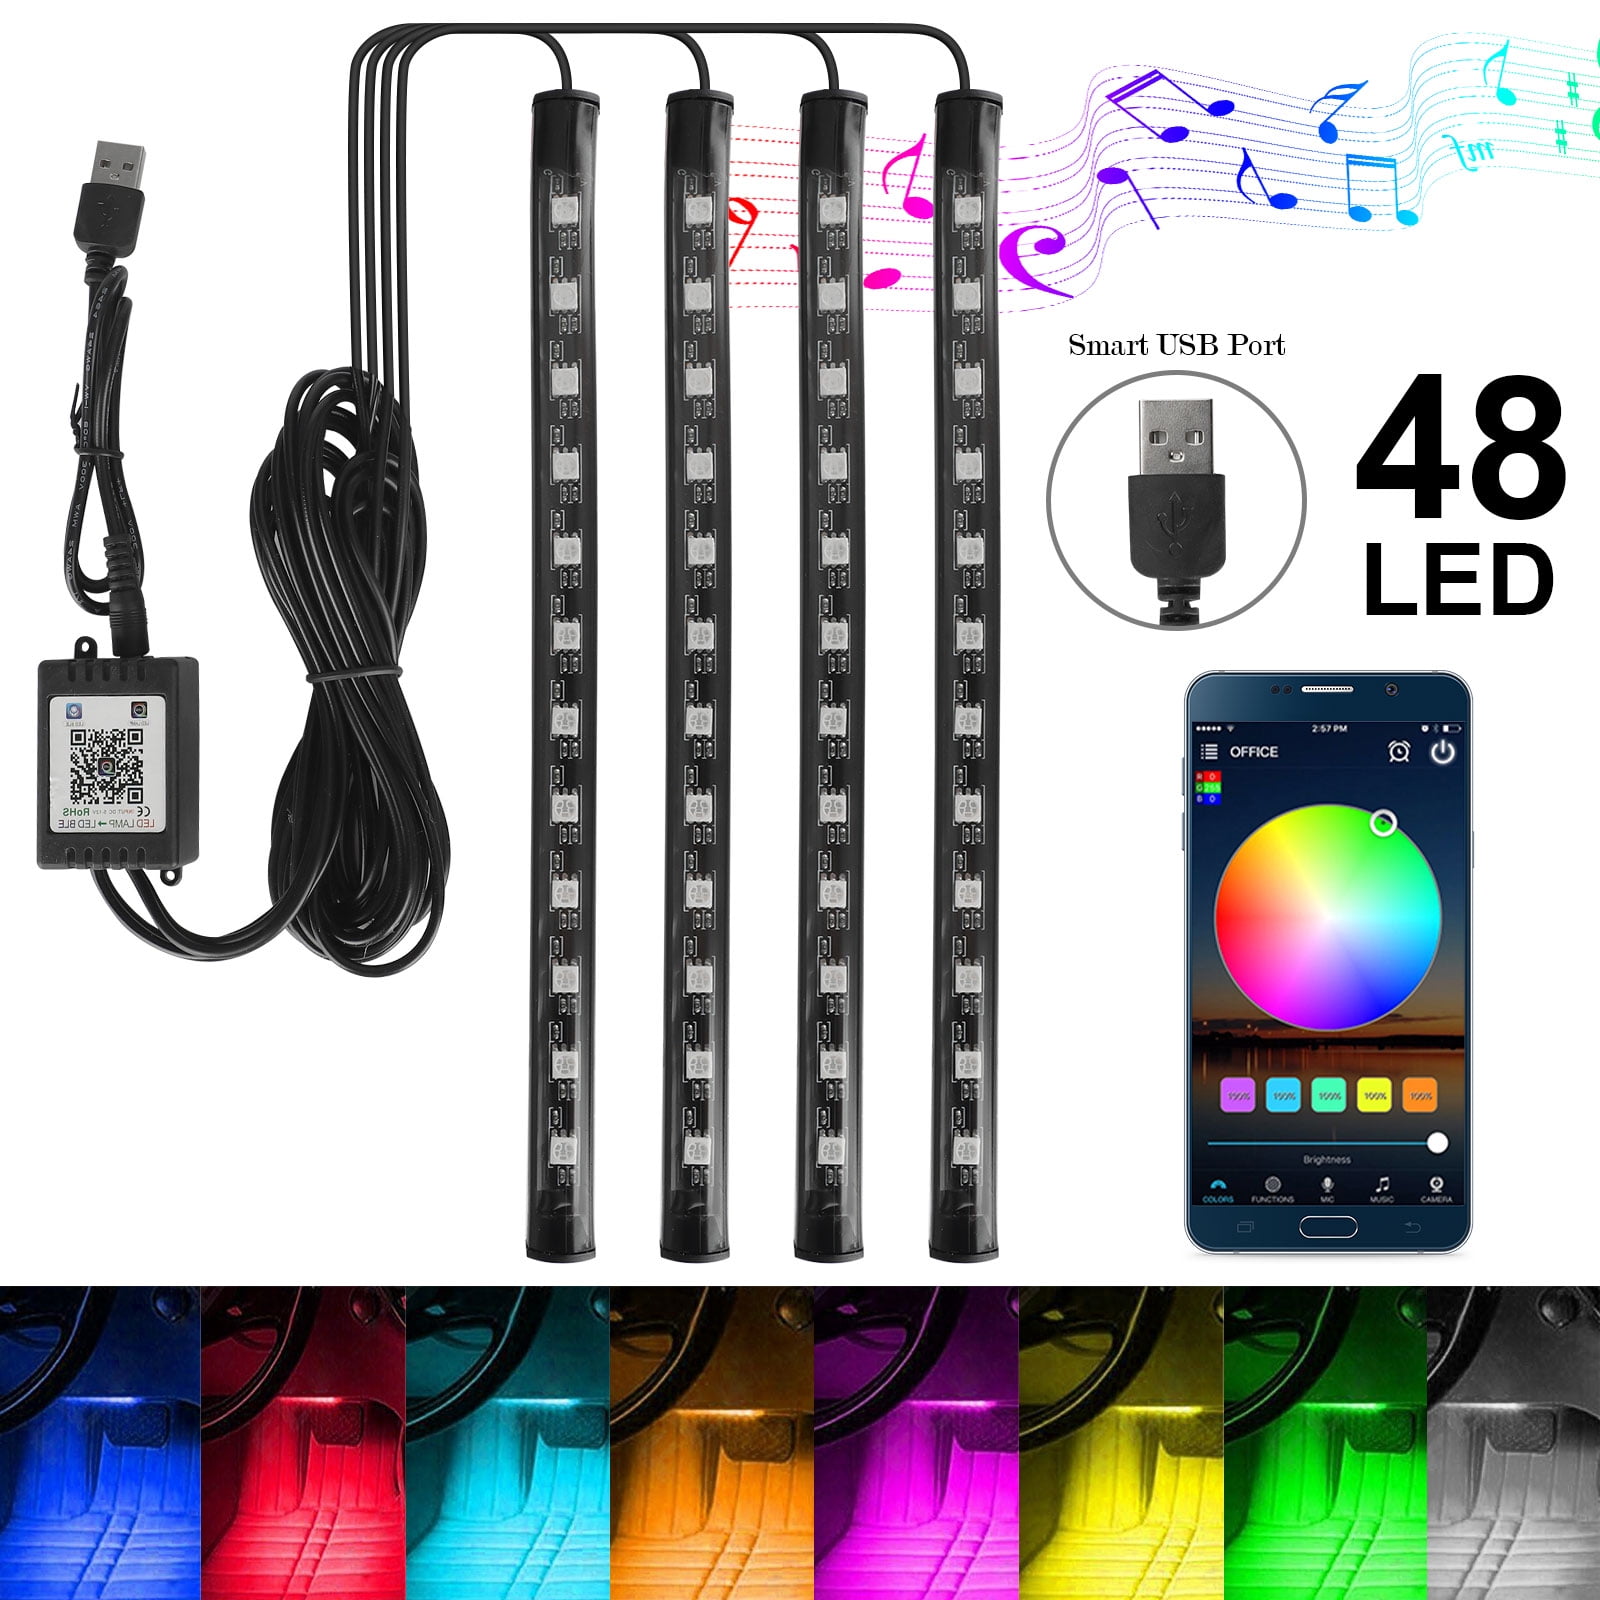 Interior Car Lights Free Car Charger DC 12V APP Controller Waterproof Car Atmosphere Footwall Lighting Kits 4pcs 48 LED Light Strips Multi DIY Color Underdash with Music Sound Active Function 